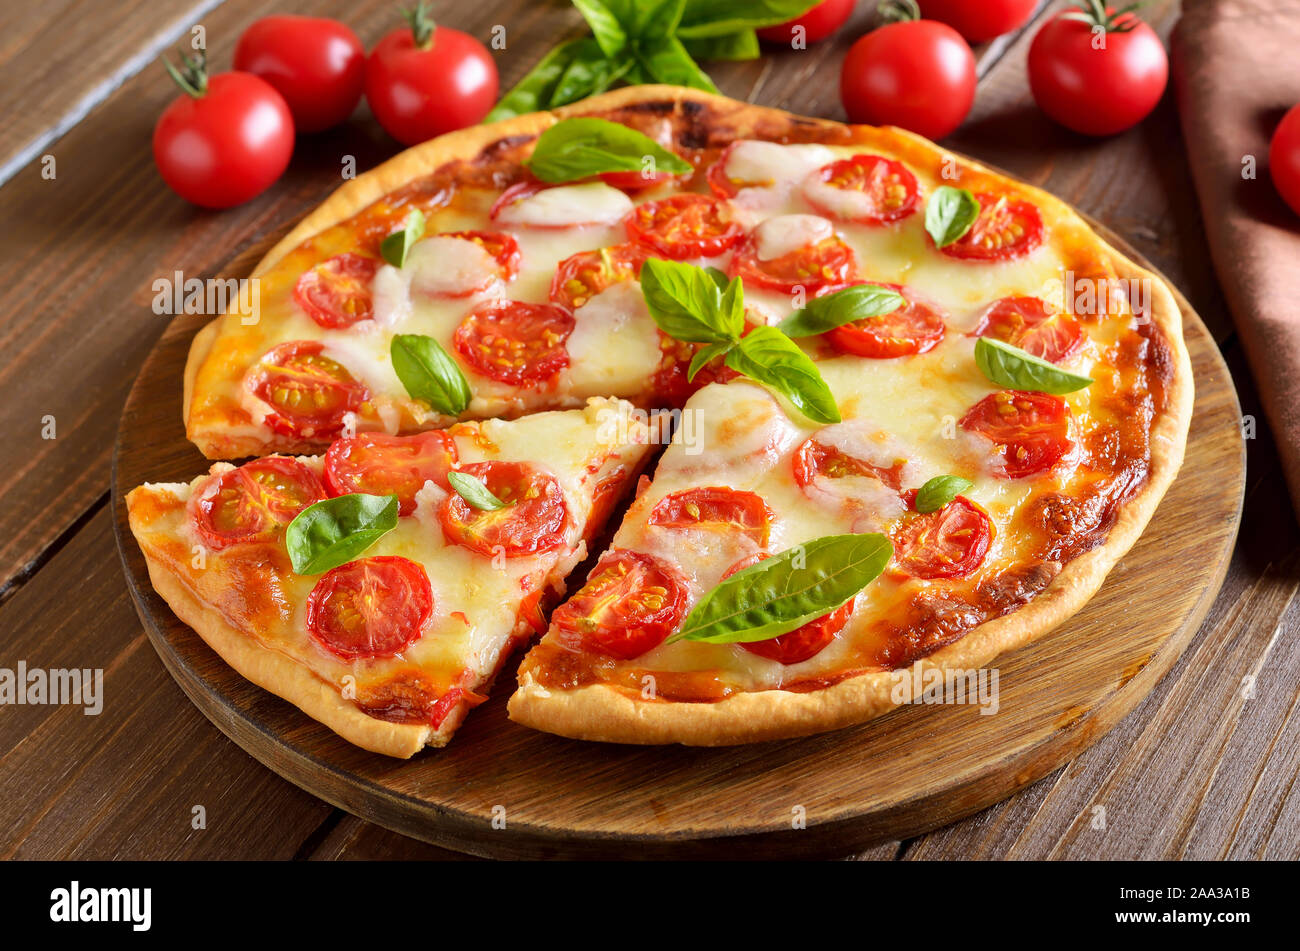 Sliced pizza Margarita on wooden table, close up view Stock Photo